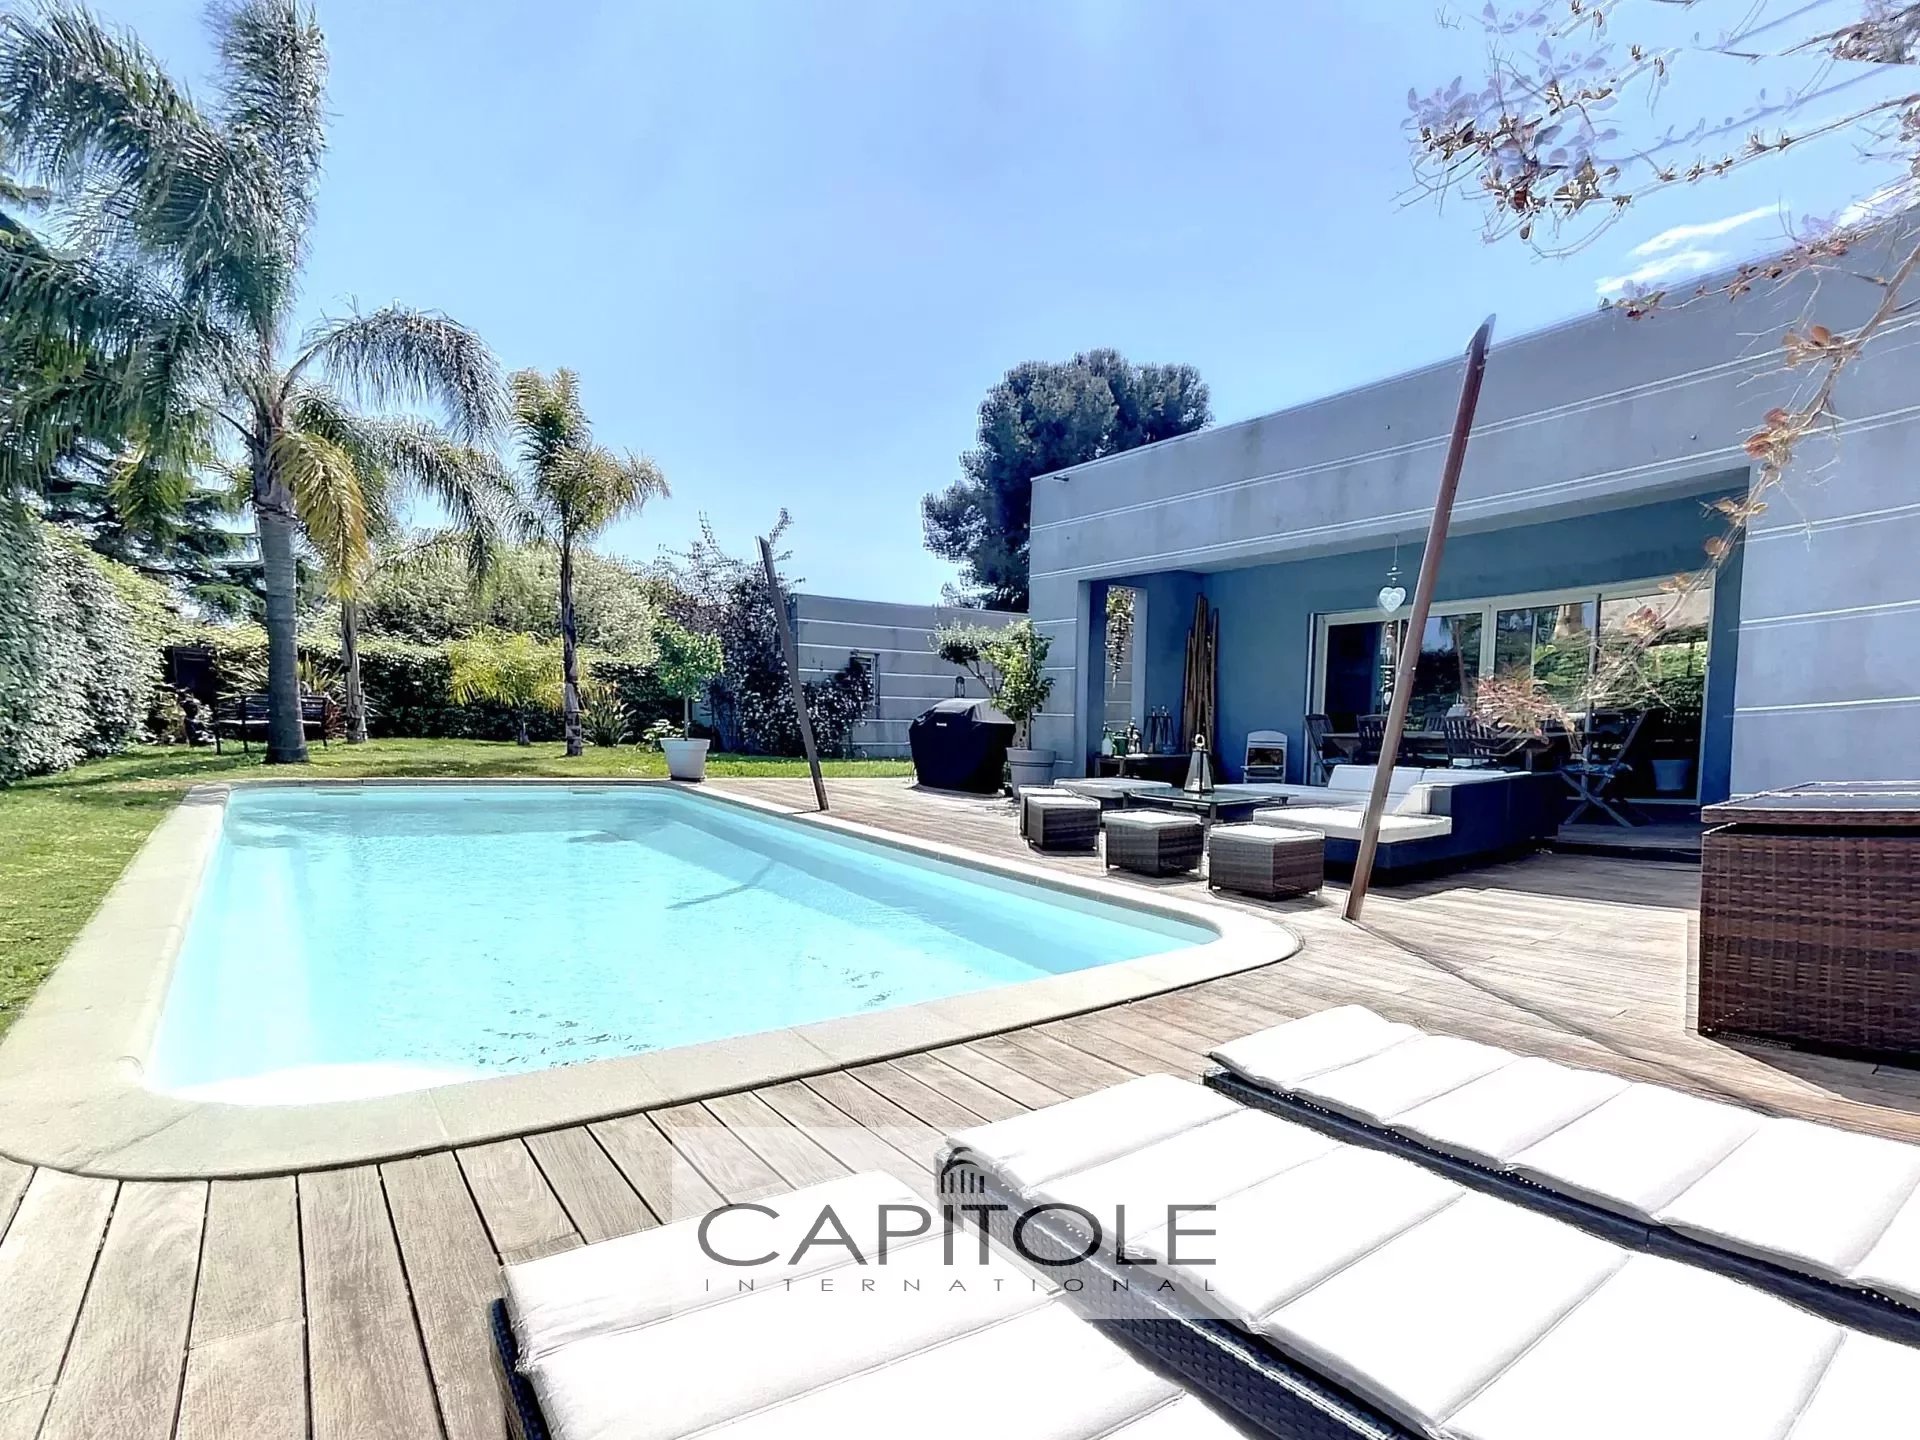 ANTIBES- For sale - 3 bedrooms contempary villa  with pool, close to  the beach , calm area